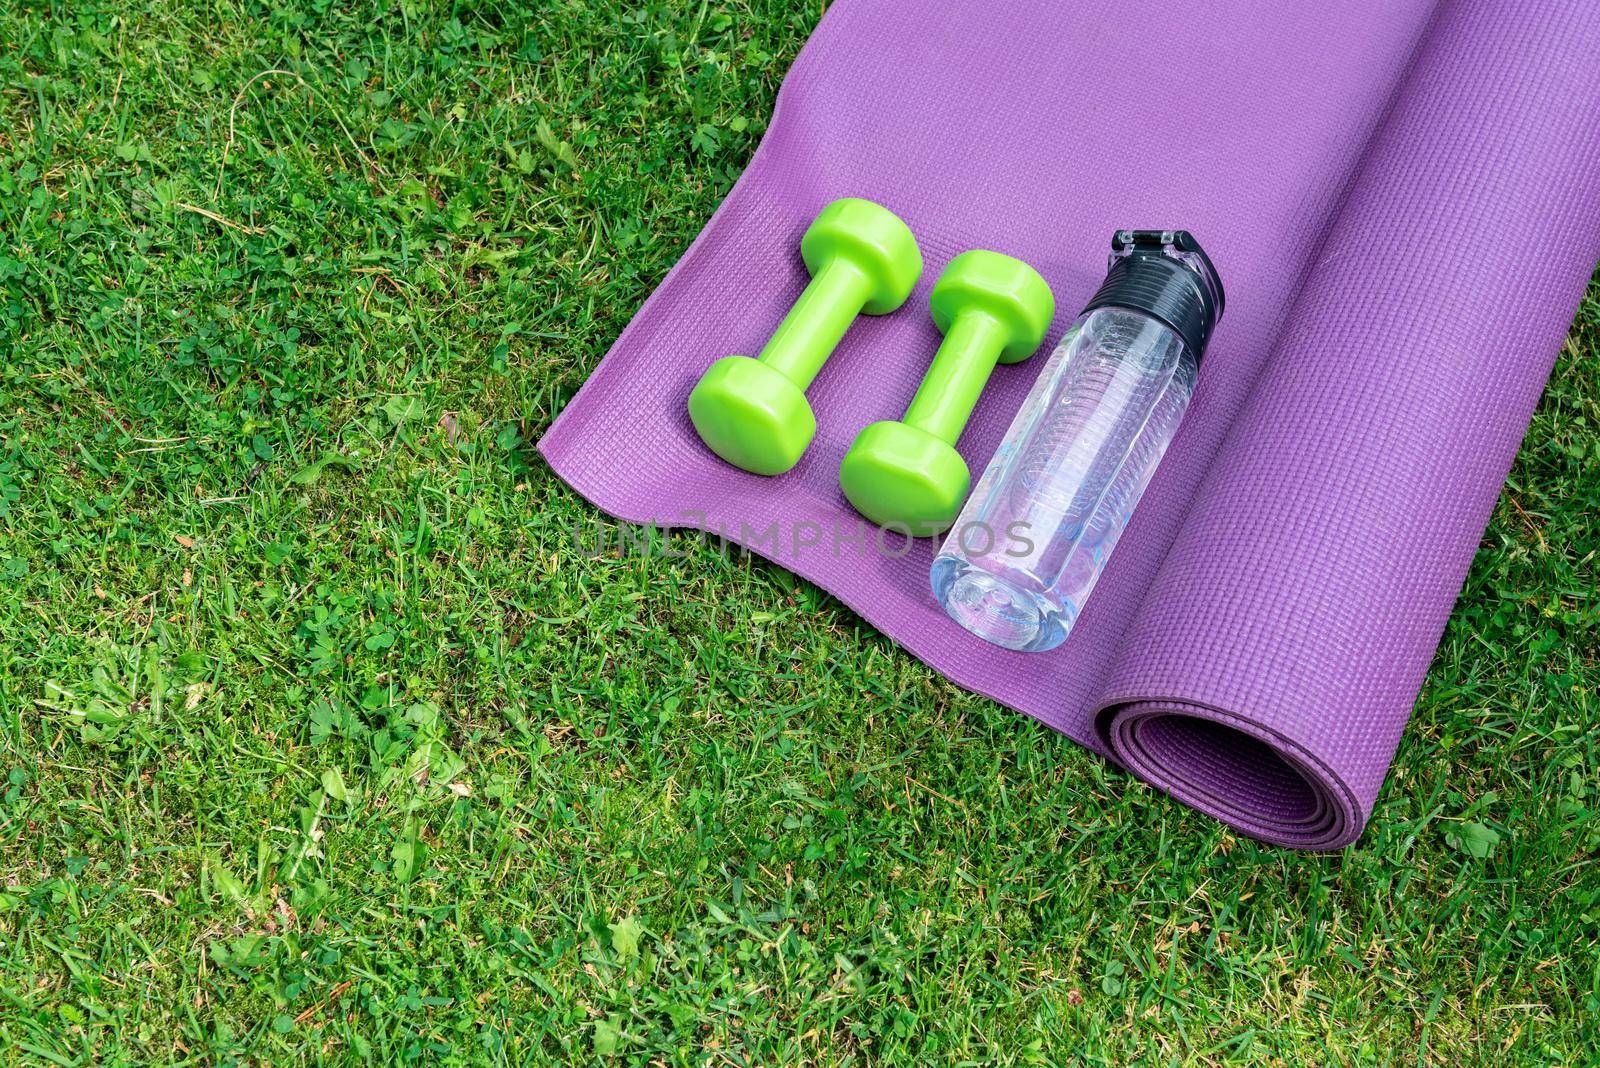 Ladie's dumbbells, water bottle and fitness mat on the green grass background, top view. Outdoor training concept. Copy-space.